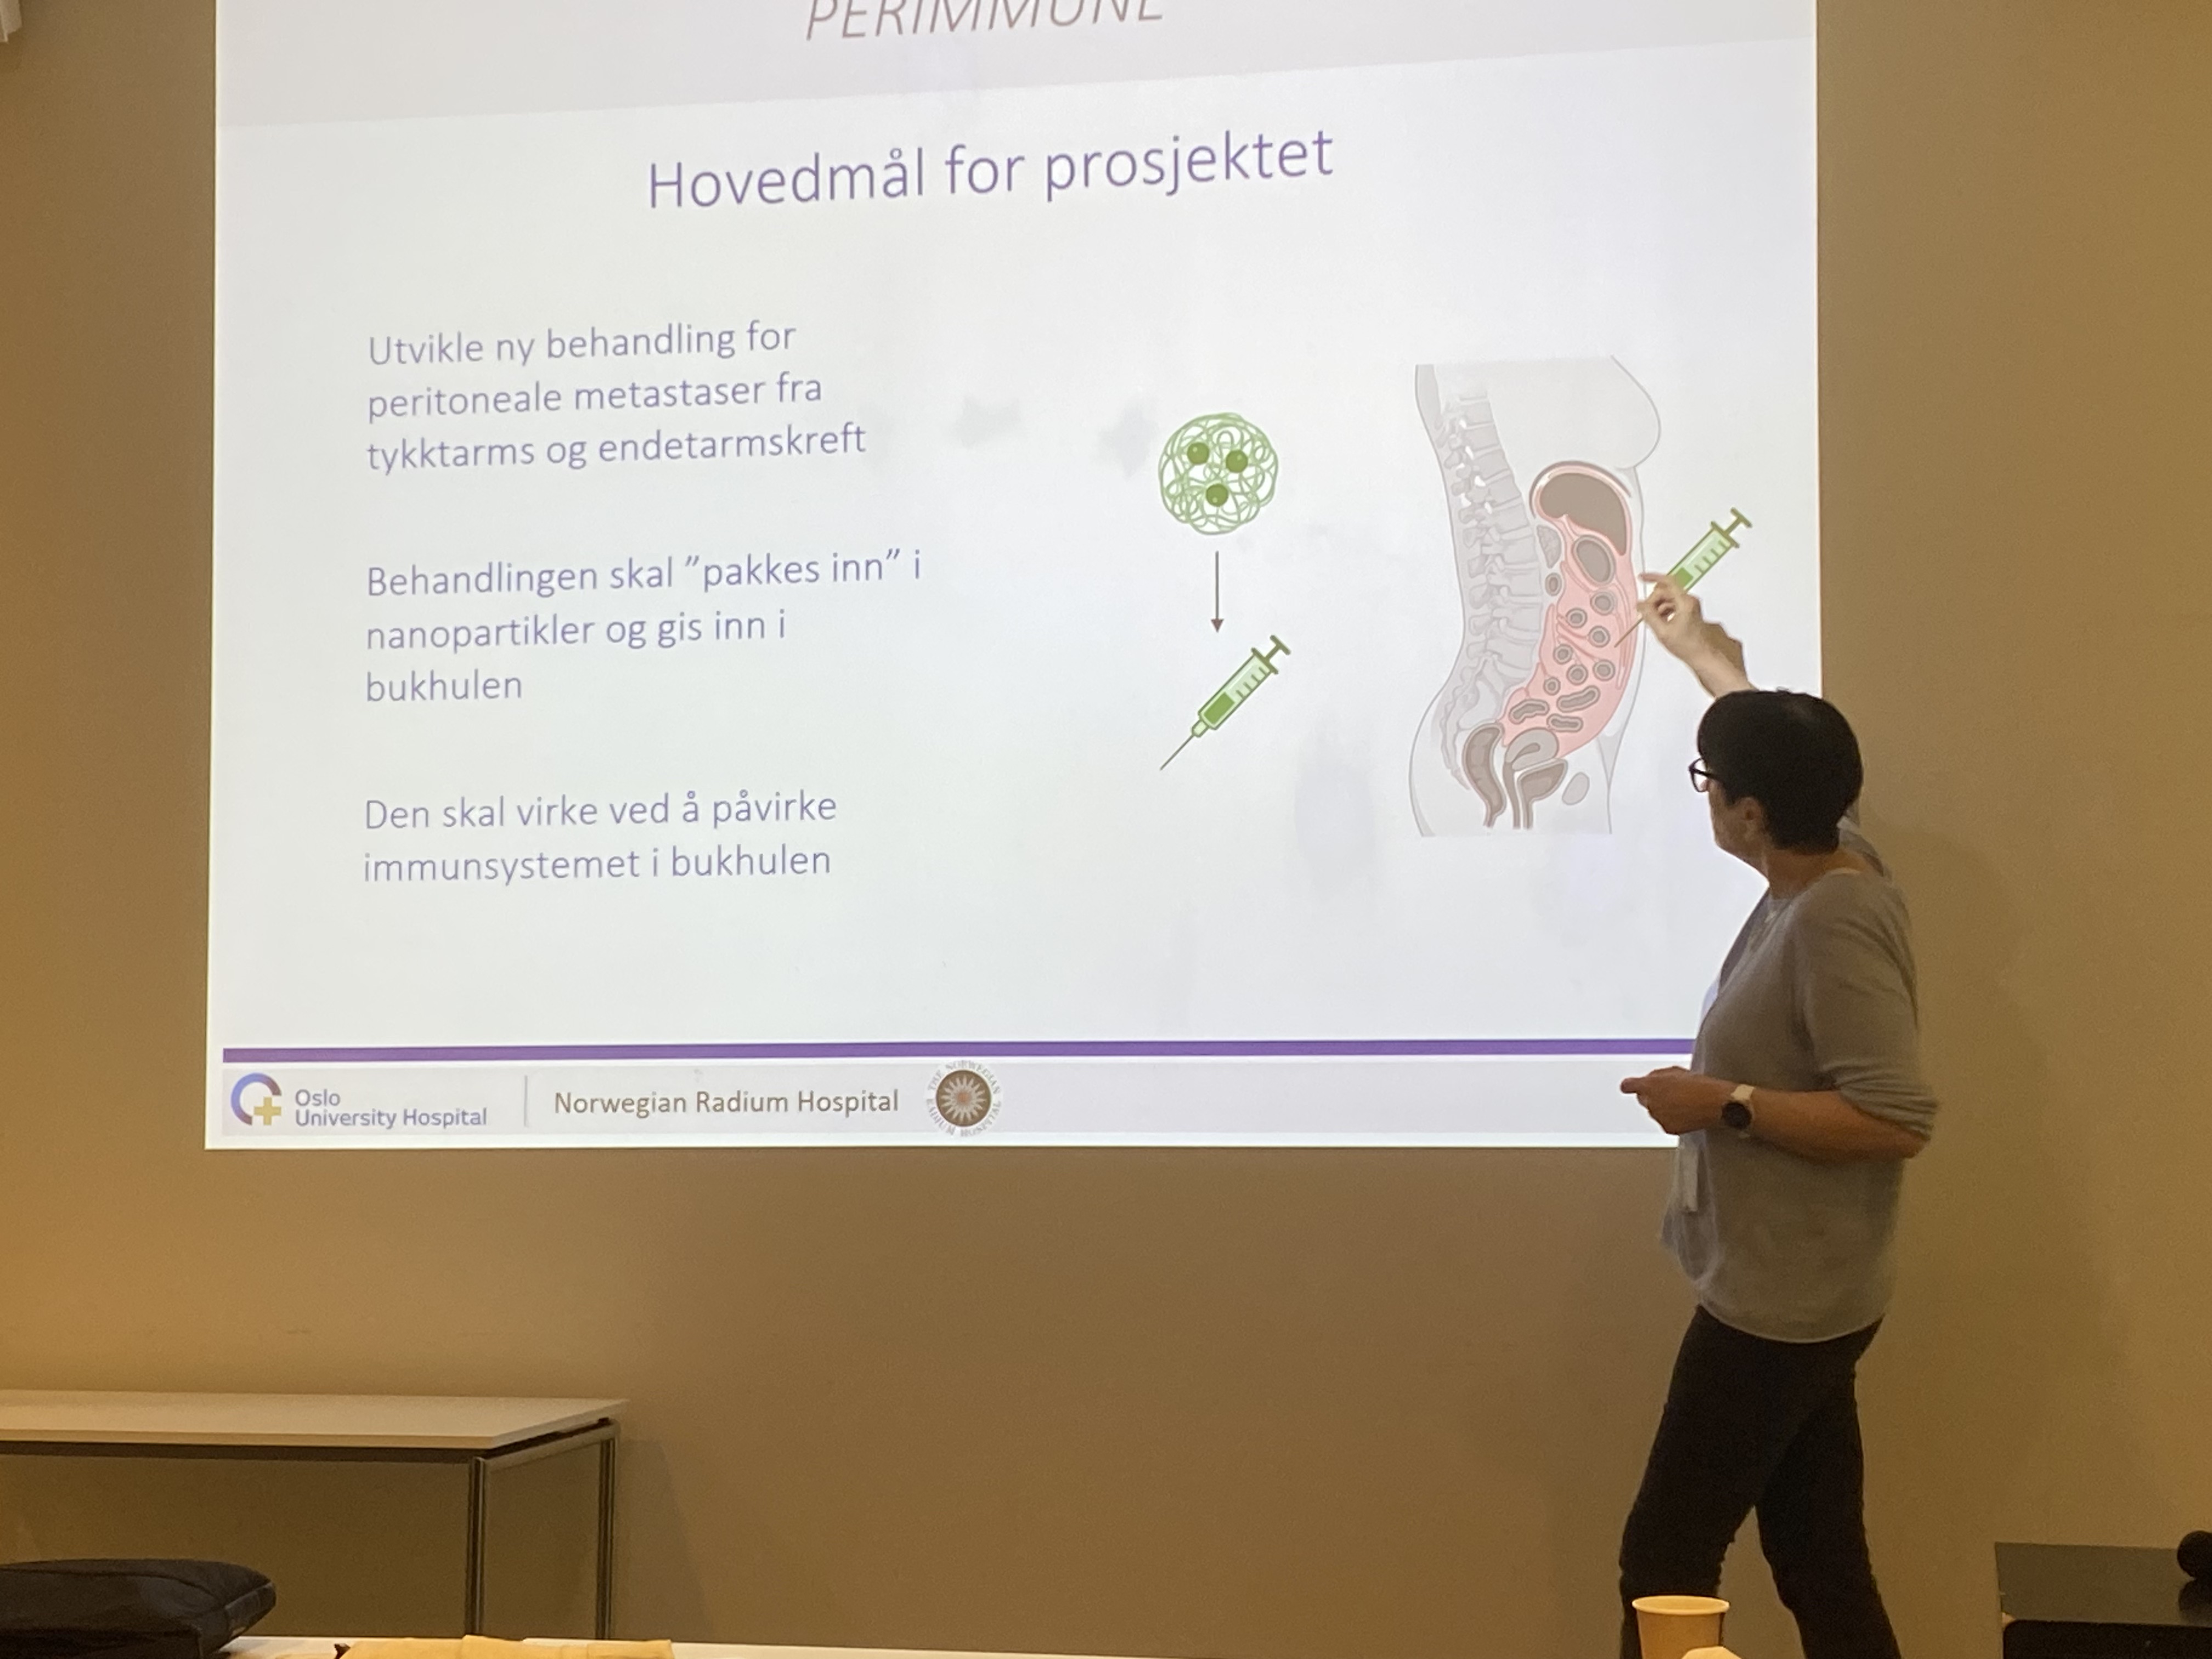 Kjersti presenting the aims of the project